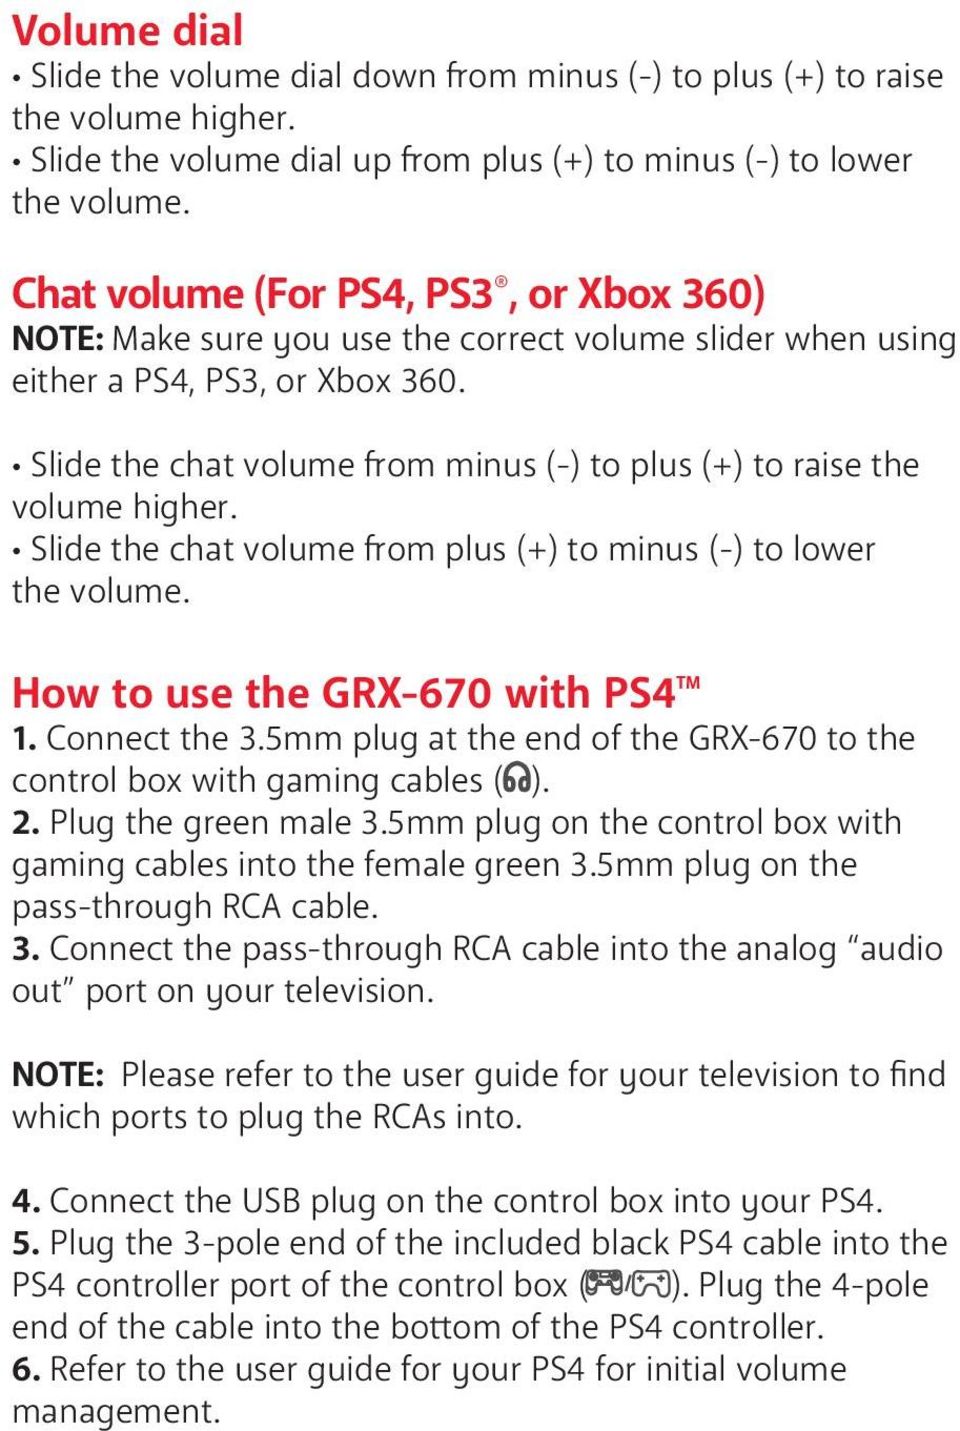 Slide the chat volume from minus (-) to plus (+) to raise the volume higher. Slide the chat volume from plus (+) to minus (-) to lower the volume. How to use the GRX-670 with PS4 TM 1. Connect the 3.